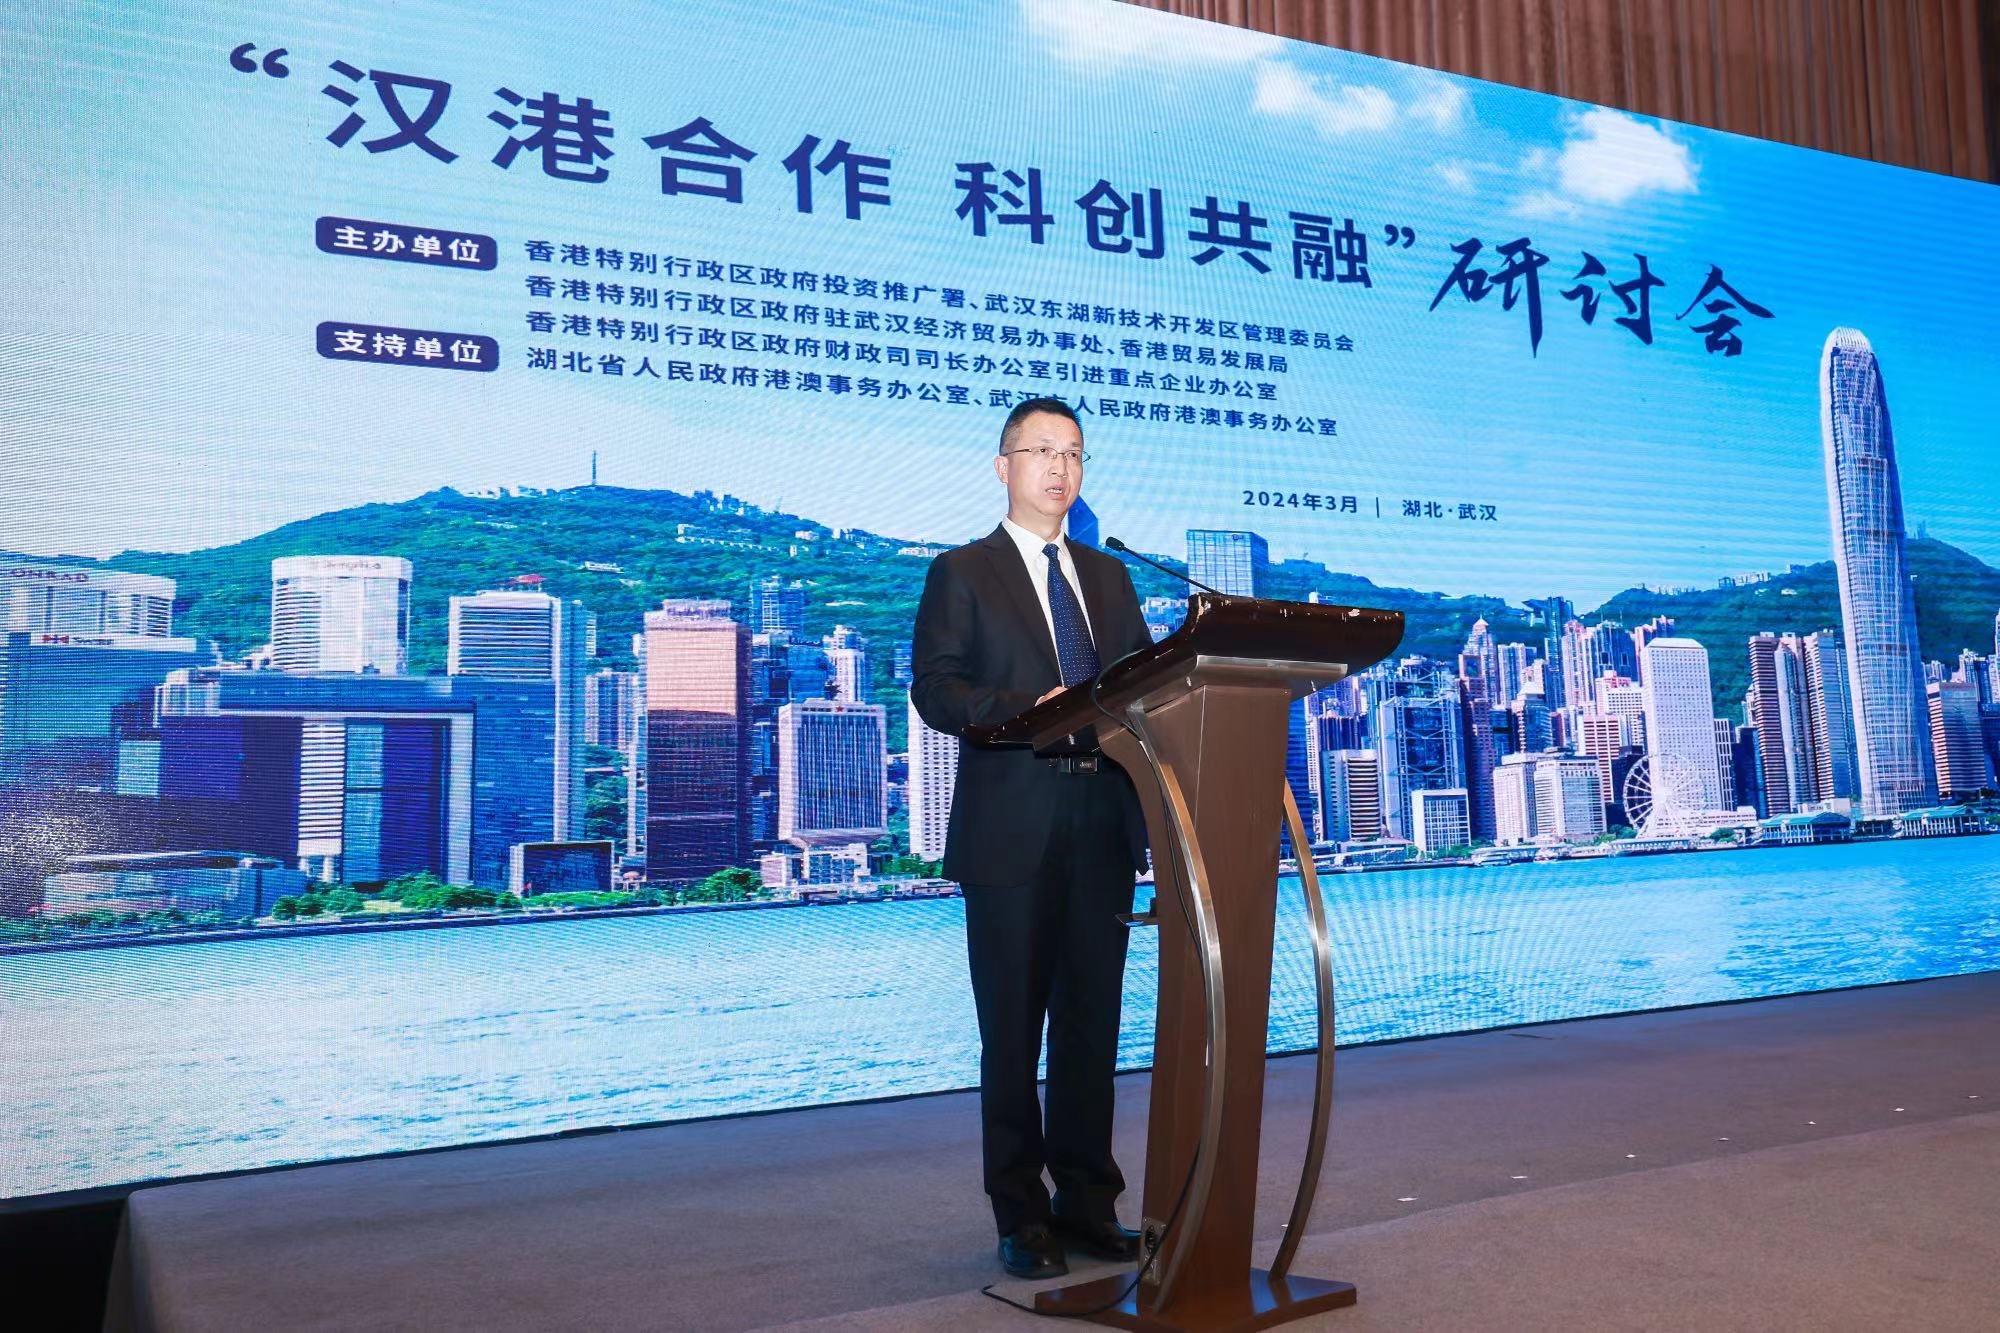 Invest Hong Kong and the Administrative Committee of Wuhan East Lake High-Tech Development Zone (WEHDZ) co-hosted a seminar in Wuhan, Hubei Province, today (March 21), encouraging local high-tech enterprises to make full use of Hong Kong's business advantages and opportunities in innovation development amid the Belt and Road Initiative and the Guangdong-Hong Kong-Macao Greater Bay Area development to expand overseas. Photo shows Deputy Director of Administrative Committee of the WEHDZ Mr Li Shiting, delivering remarks at the seminar. 


